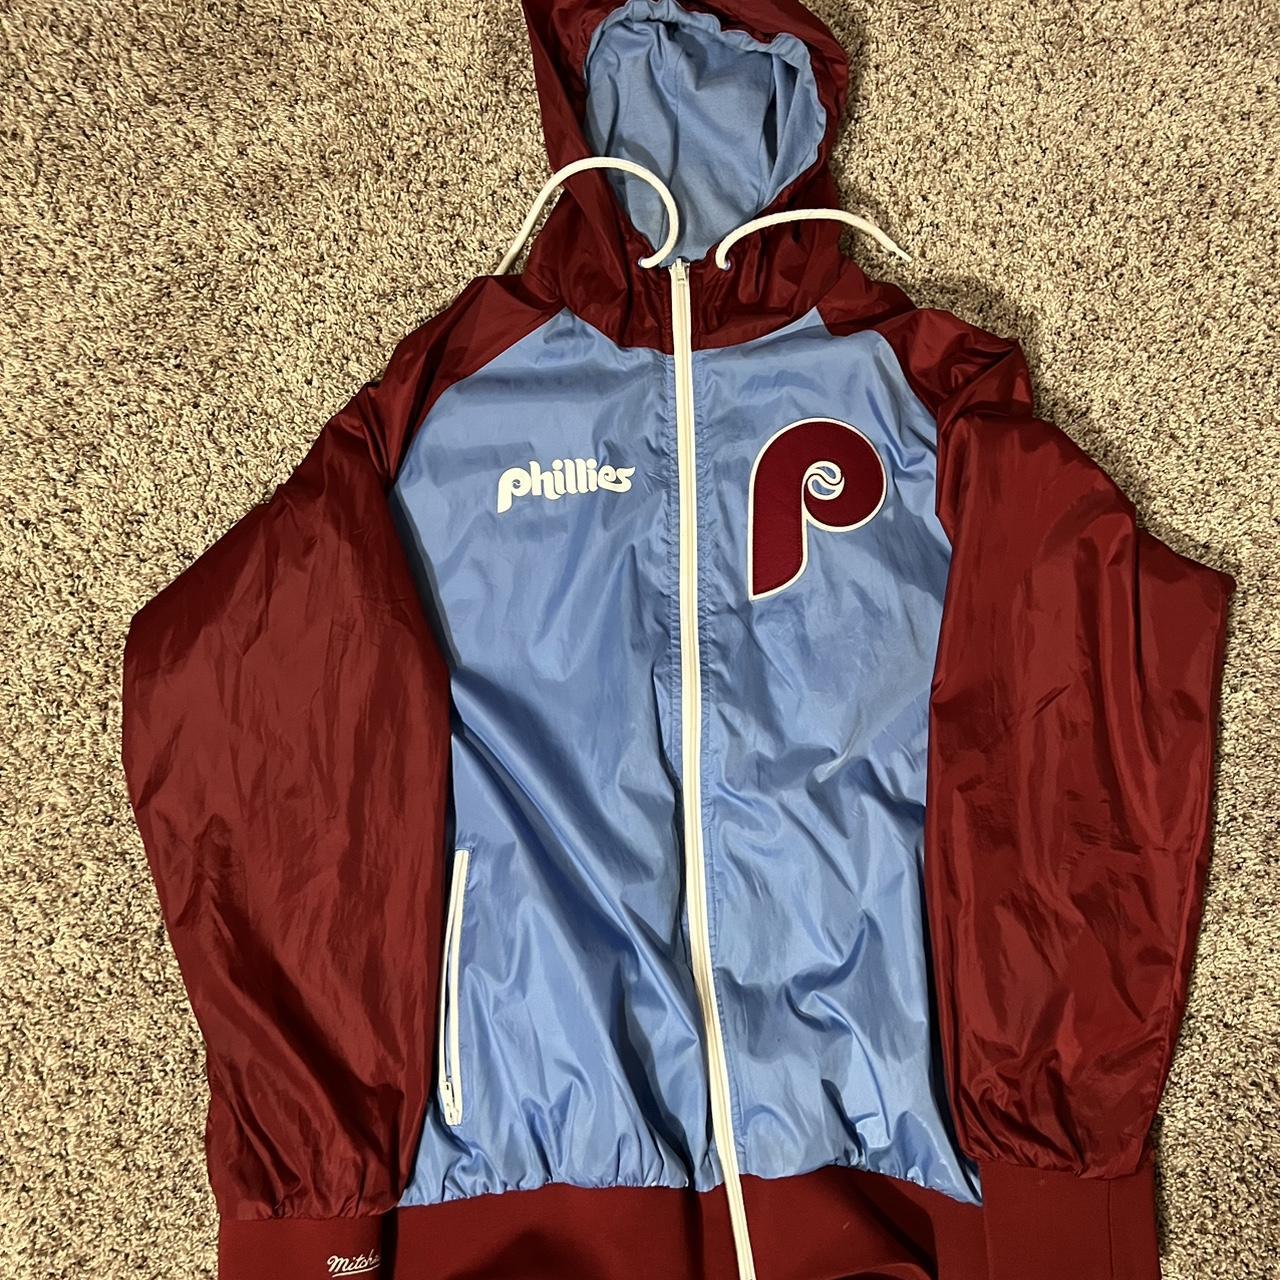 Mitchel and Ness Cooperstown Collection Phillies - Depop